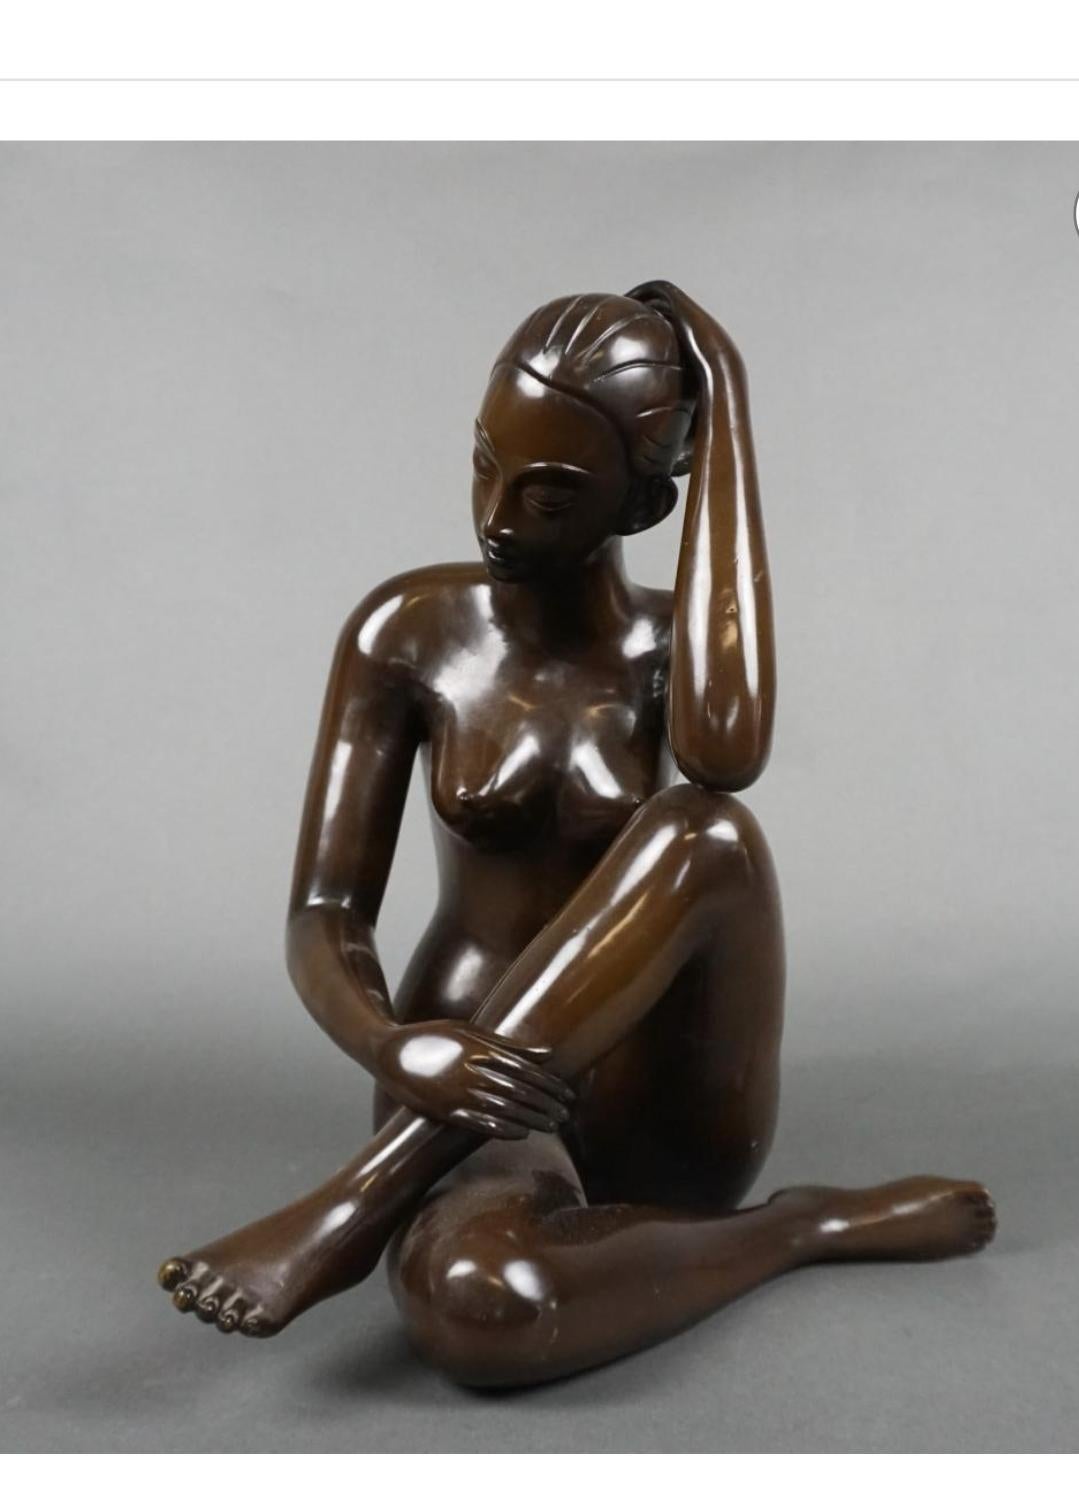  20th Century Large Patinated Bronze Sculpture of a Seated Nude Lady.
Excellent quality. Measures 12